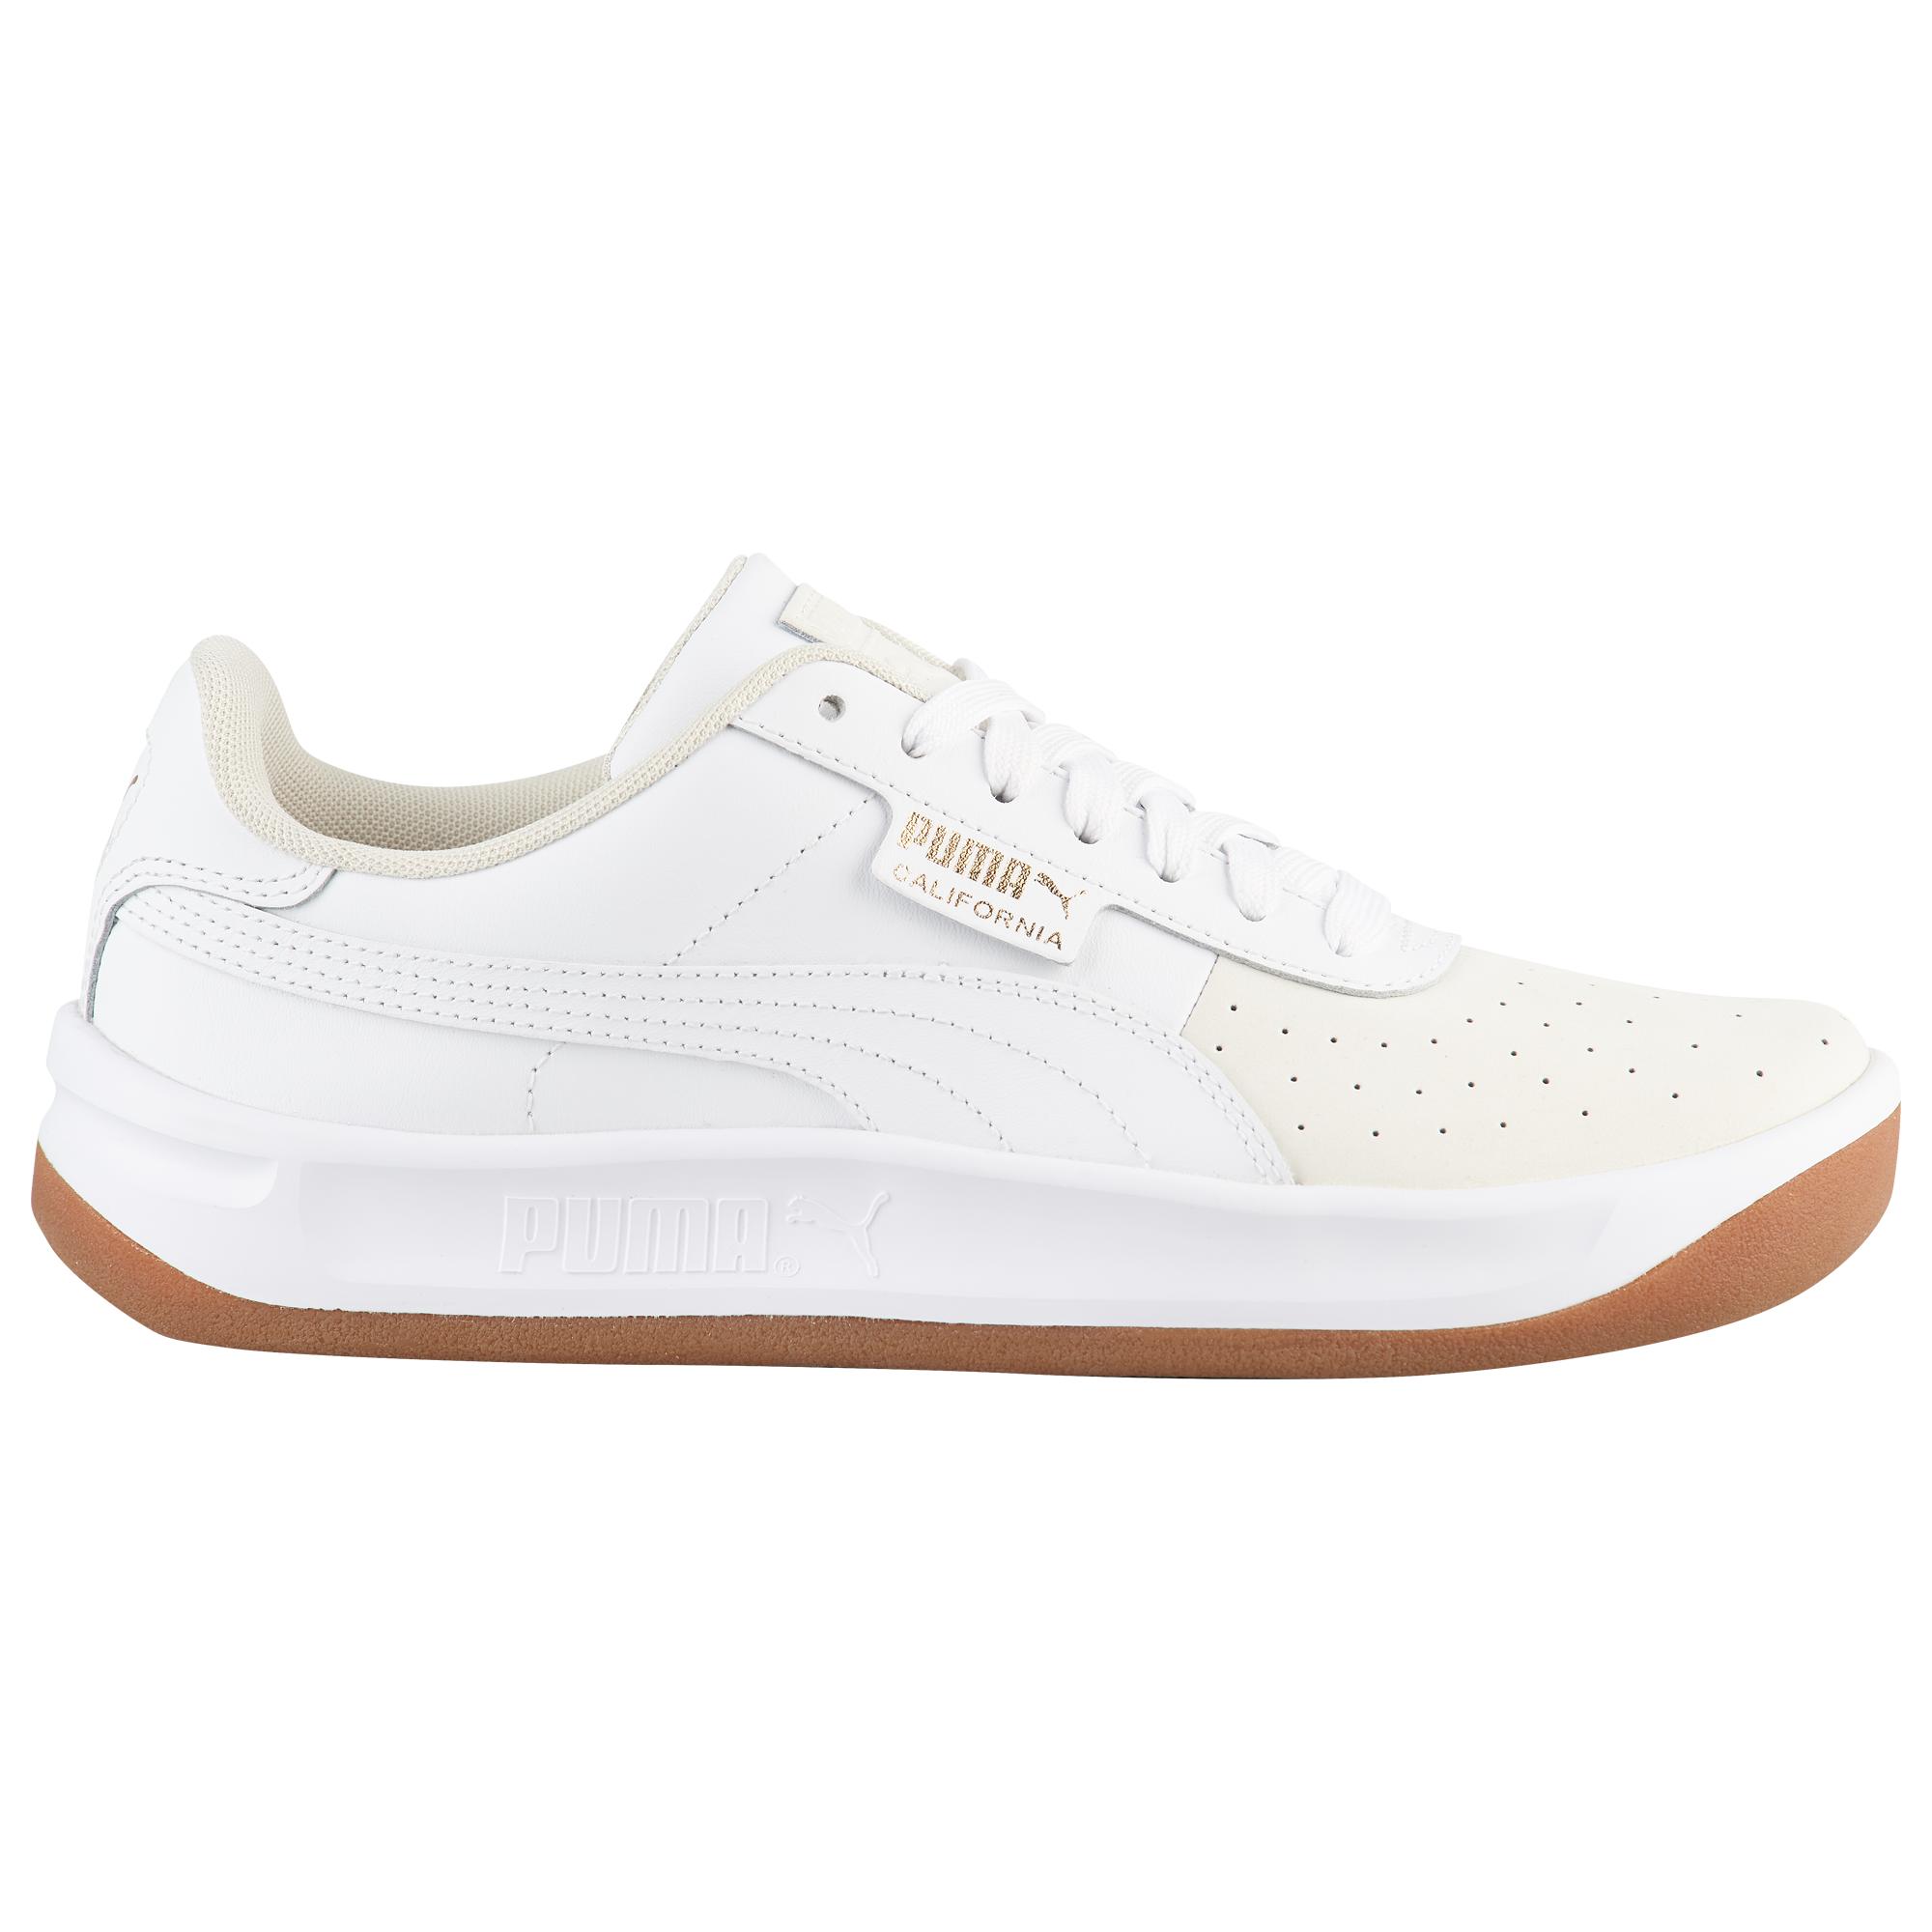 PUMA Suede California Exotic Tennis Shoes in White - Lyst